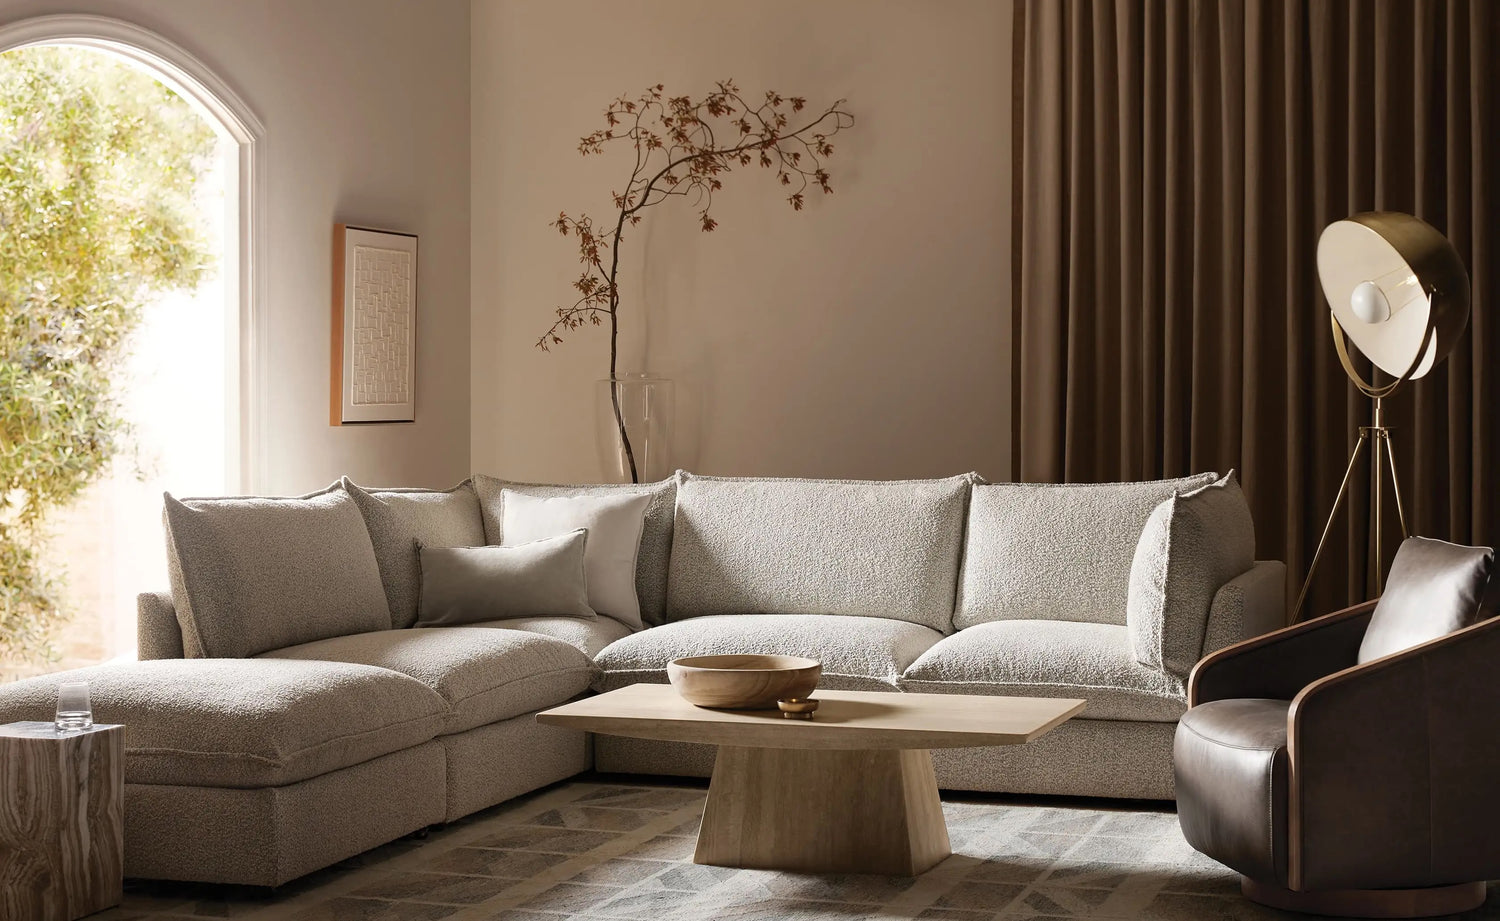 A modern living room featuring a light gray sectional sofa, a wooden coffee table with a bowl, and a brown leather armchair. The room is decorated with a large floor lamp, a piece of wall art, and a tall vase with dried branches, with natural light streaming through an arched window.